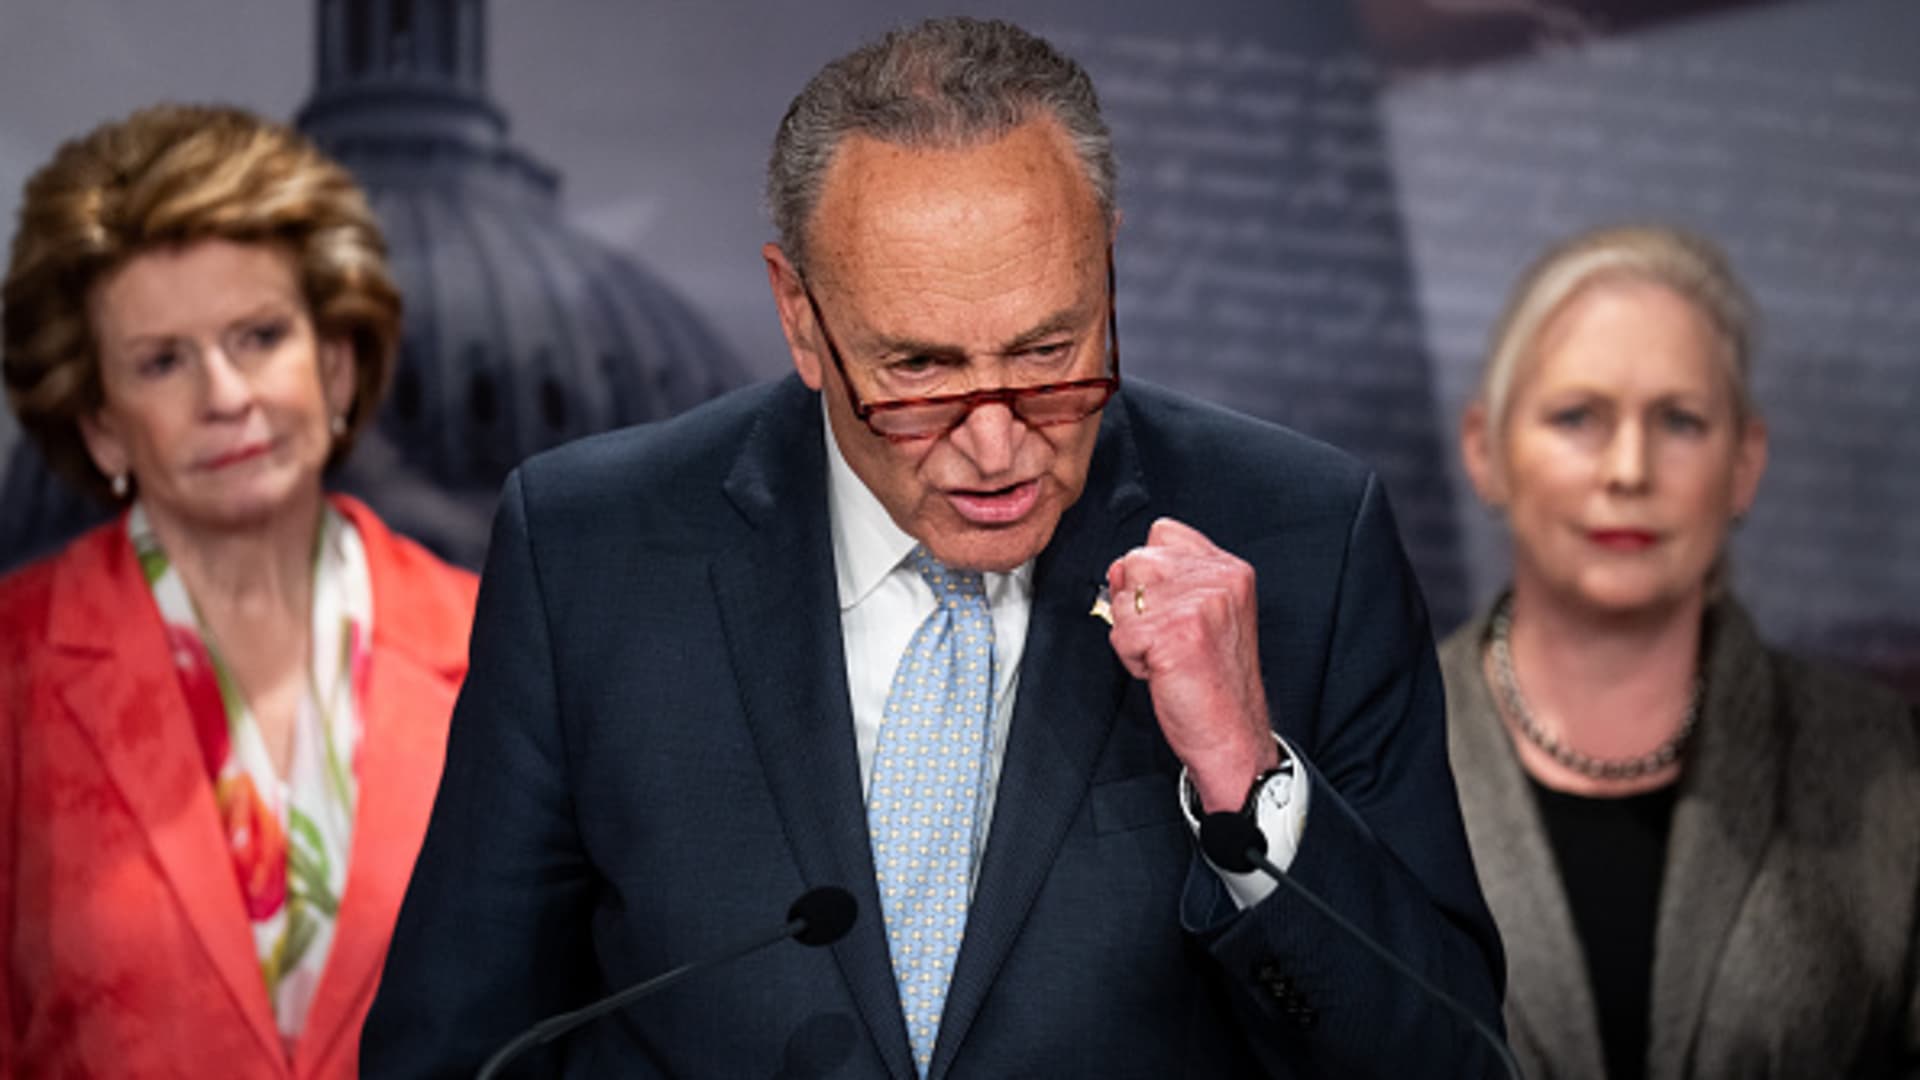 Senate Majority Leader Chuck Schumer, D-N.Y., flanked from left by Sen. Debbie Stabenow, D-Mich., and Sen. Kirsten Gillibrand, D-N.Y., holds a news conference on Thursday, May 5, 2022, to announce the Senate will vote on the Women's Health Protection Act of 2022.